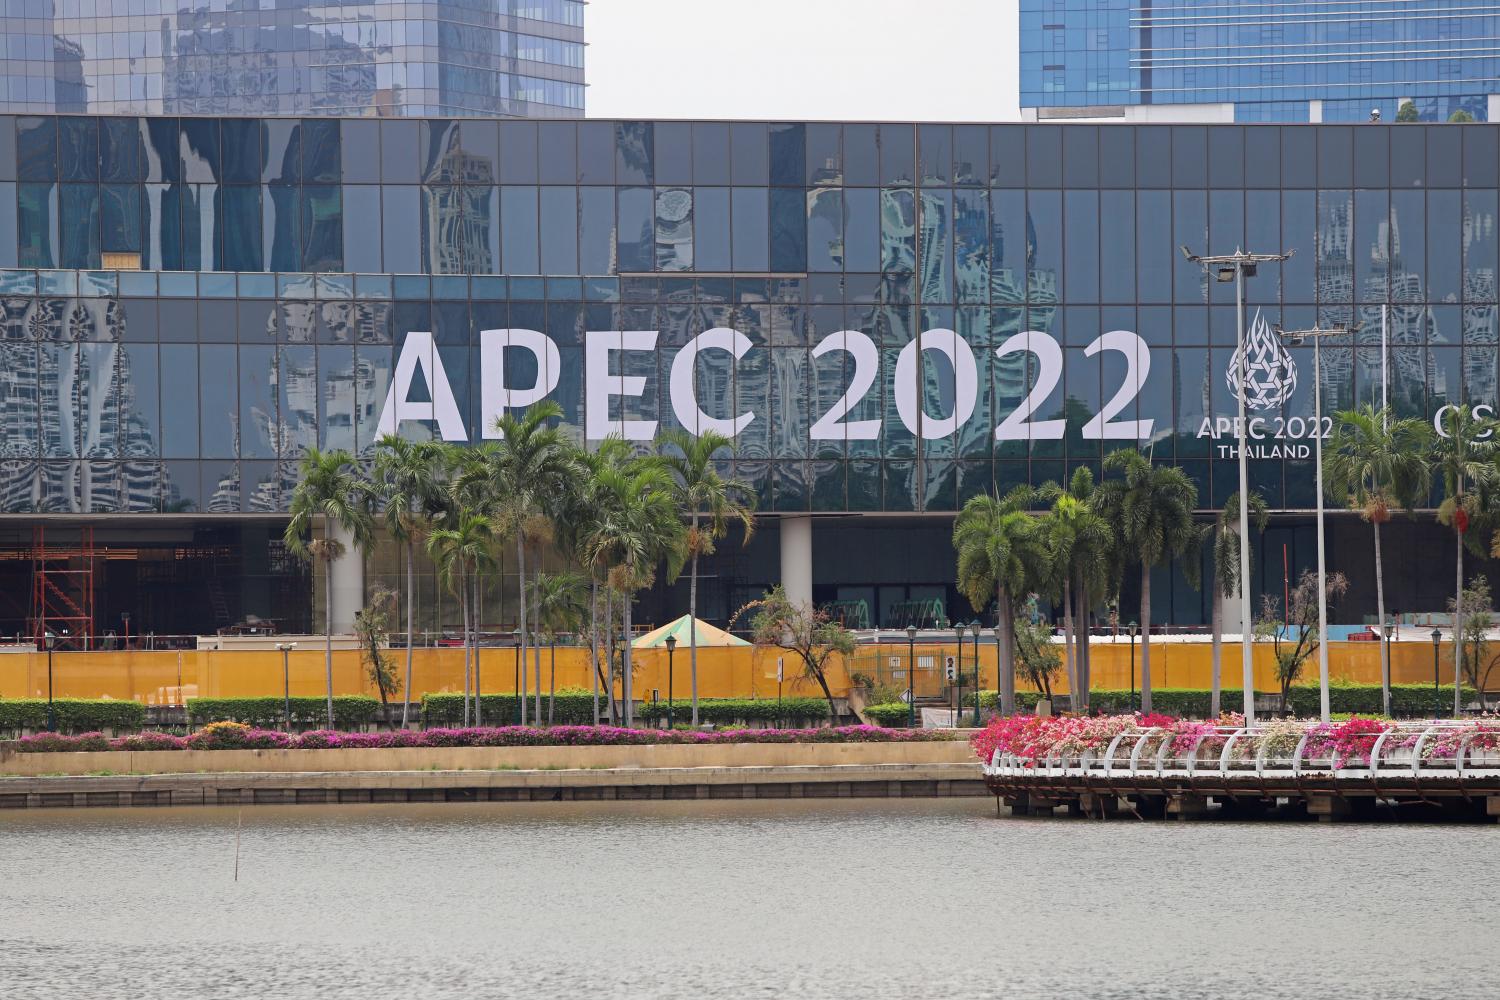 A building bearing the name of the APEC 2022 conference